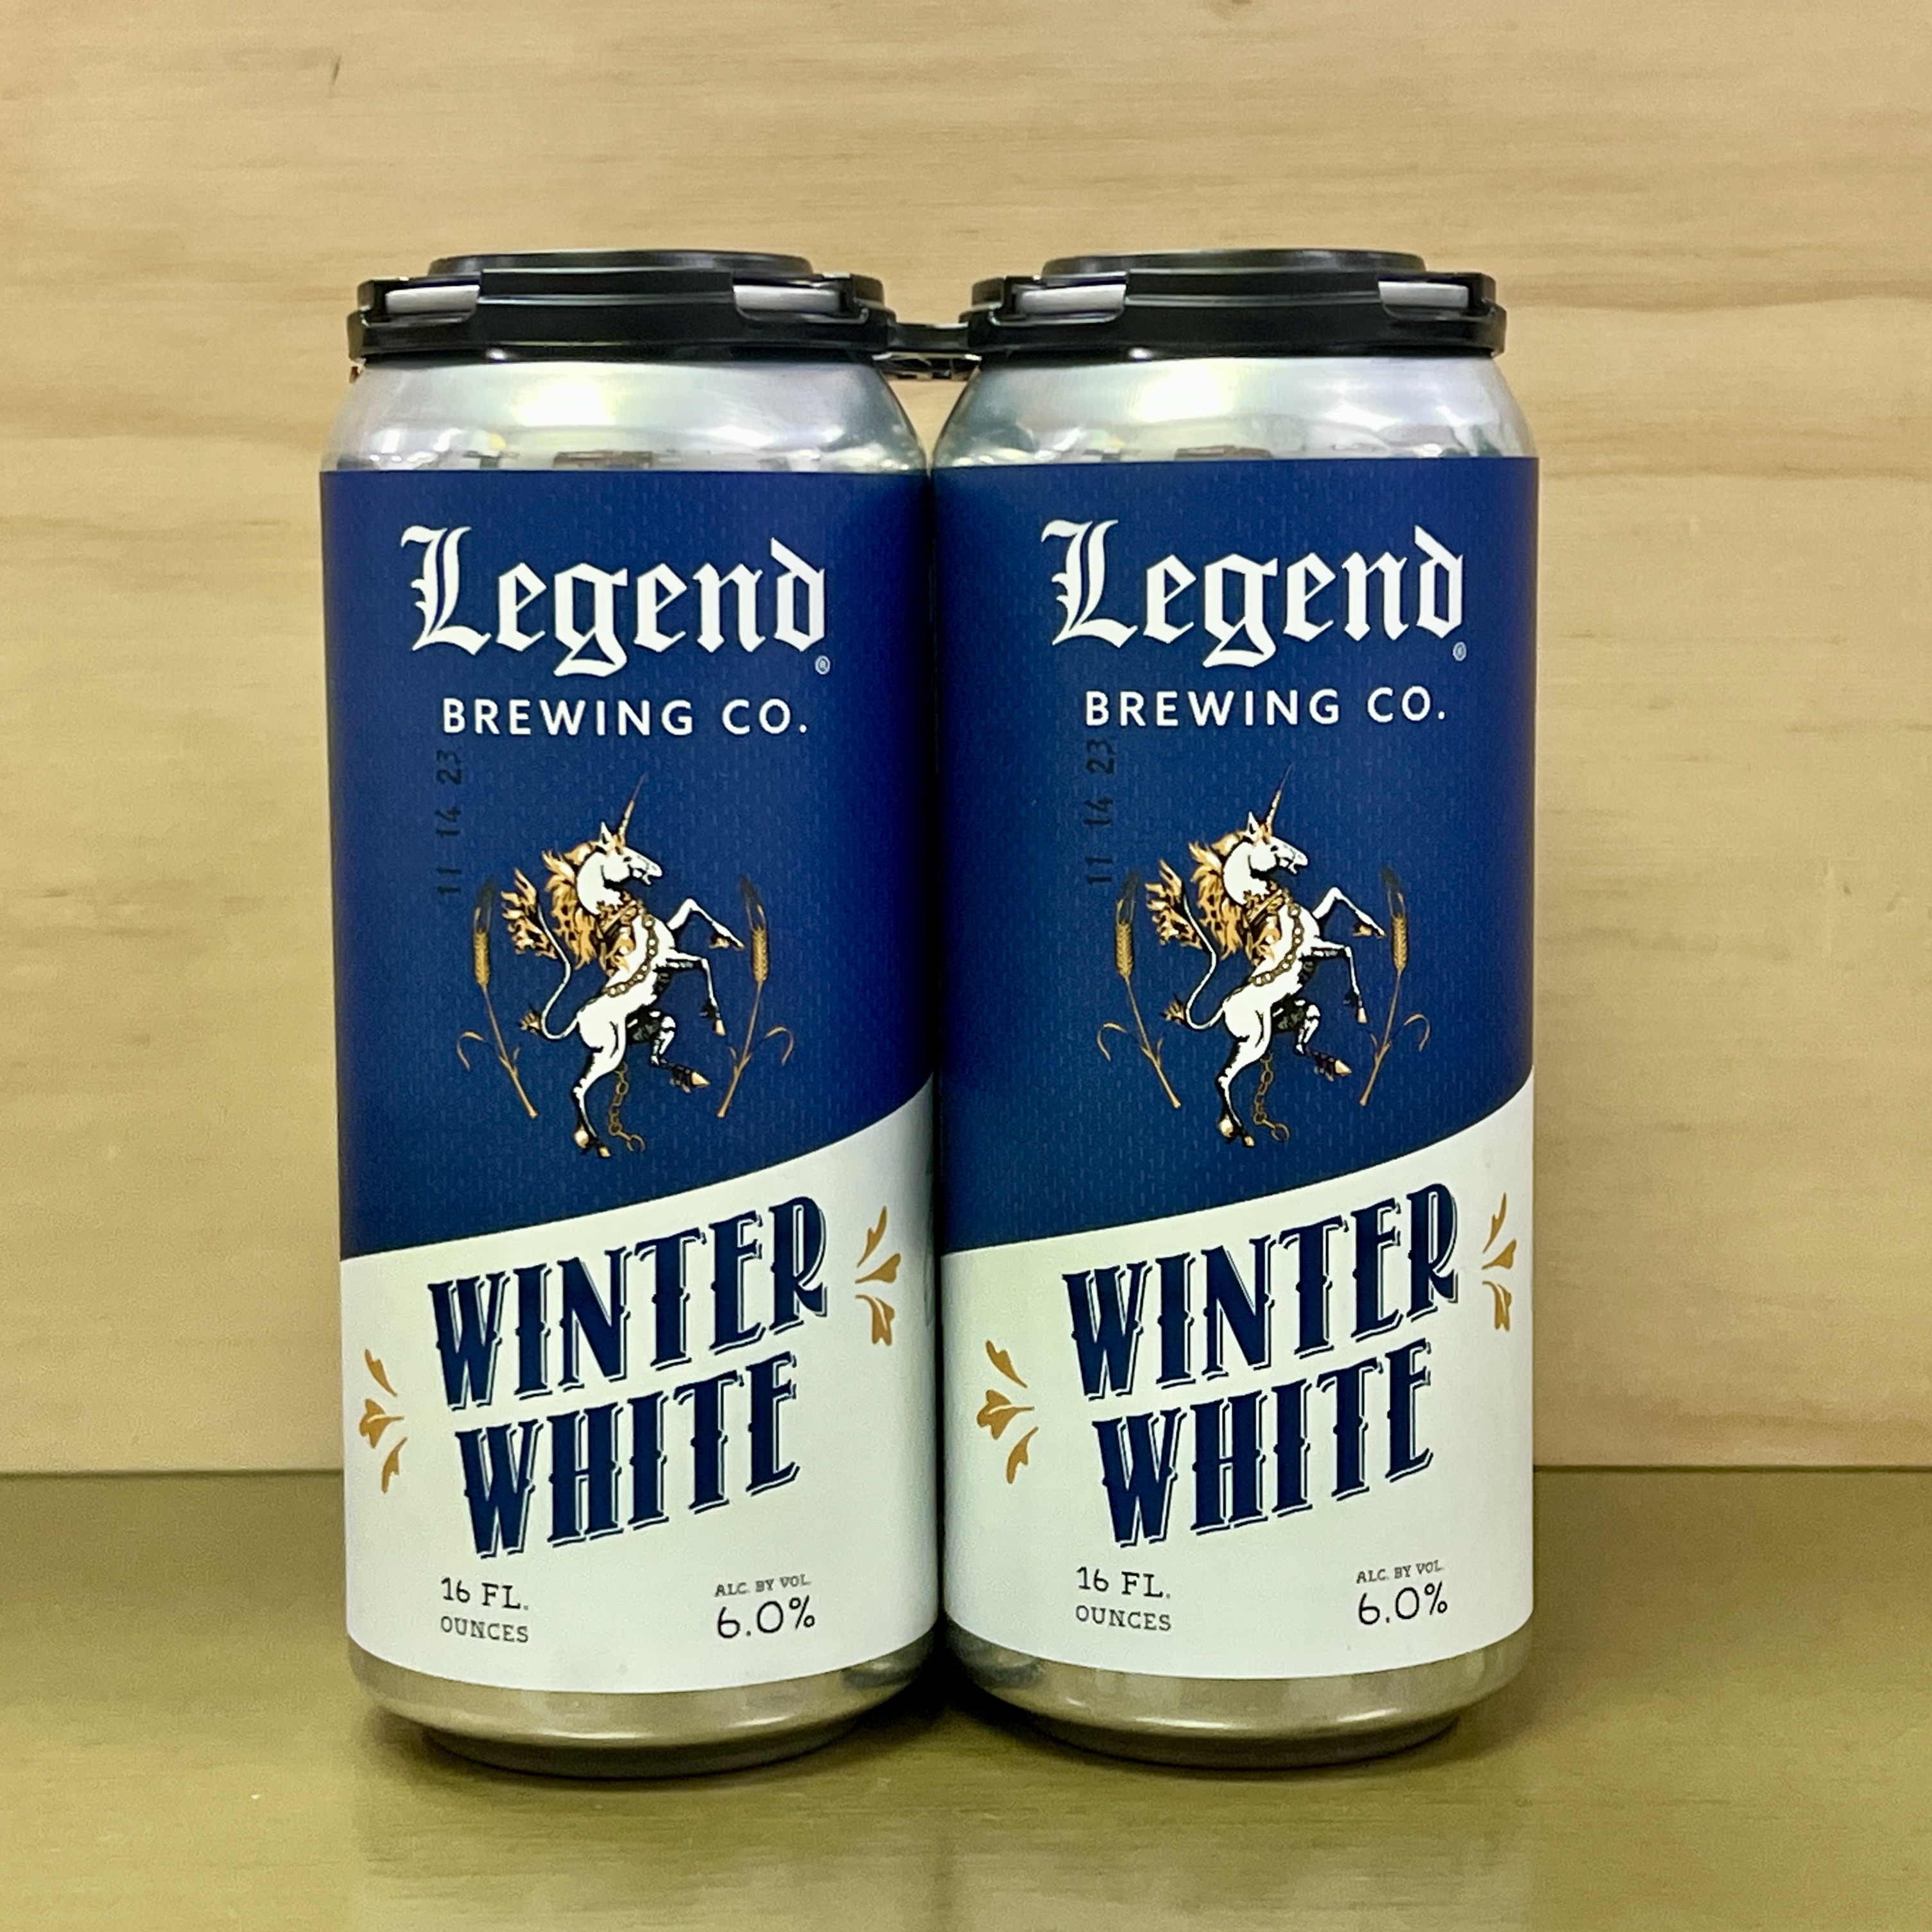 Legend Winter White Belgian style Wit Beer 4 x 16oz cans - Click Image to Close